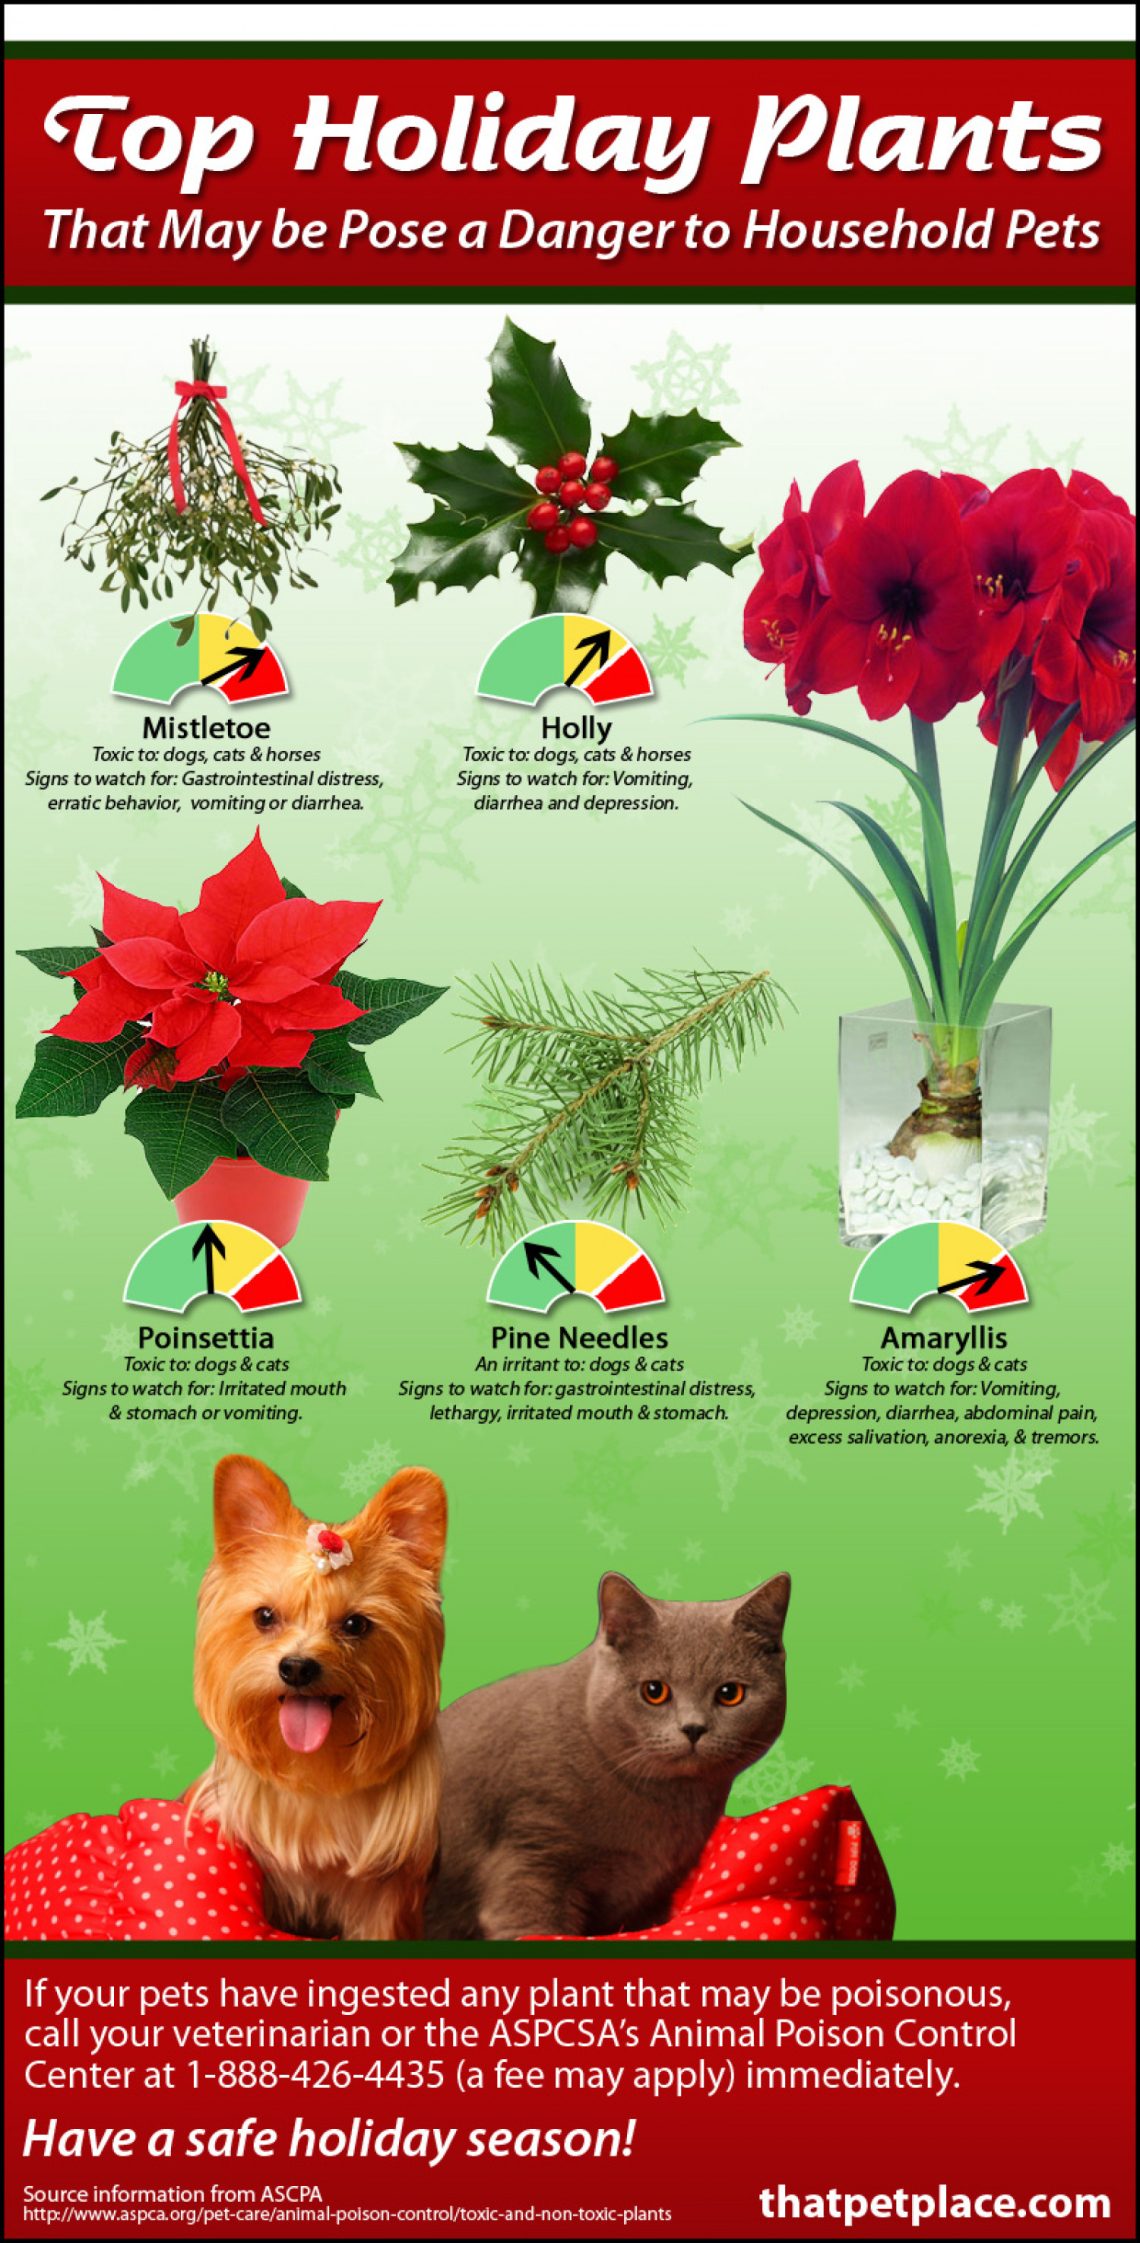 Holiday plants that can be dangerous for cats